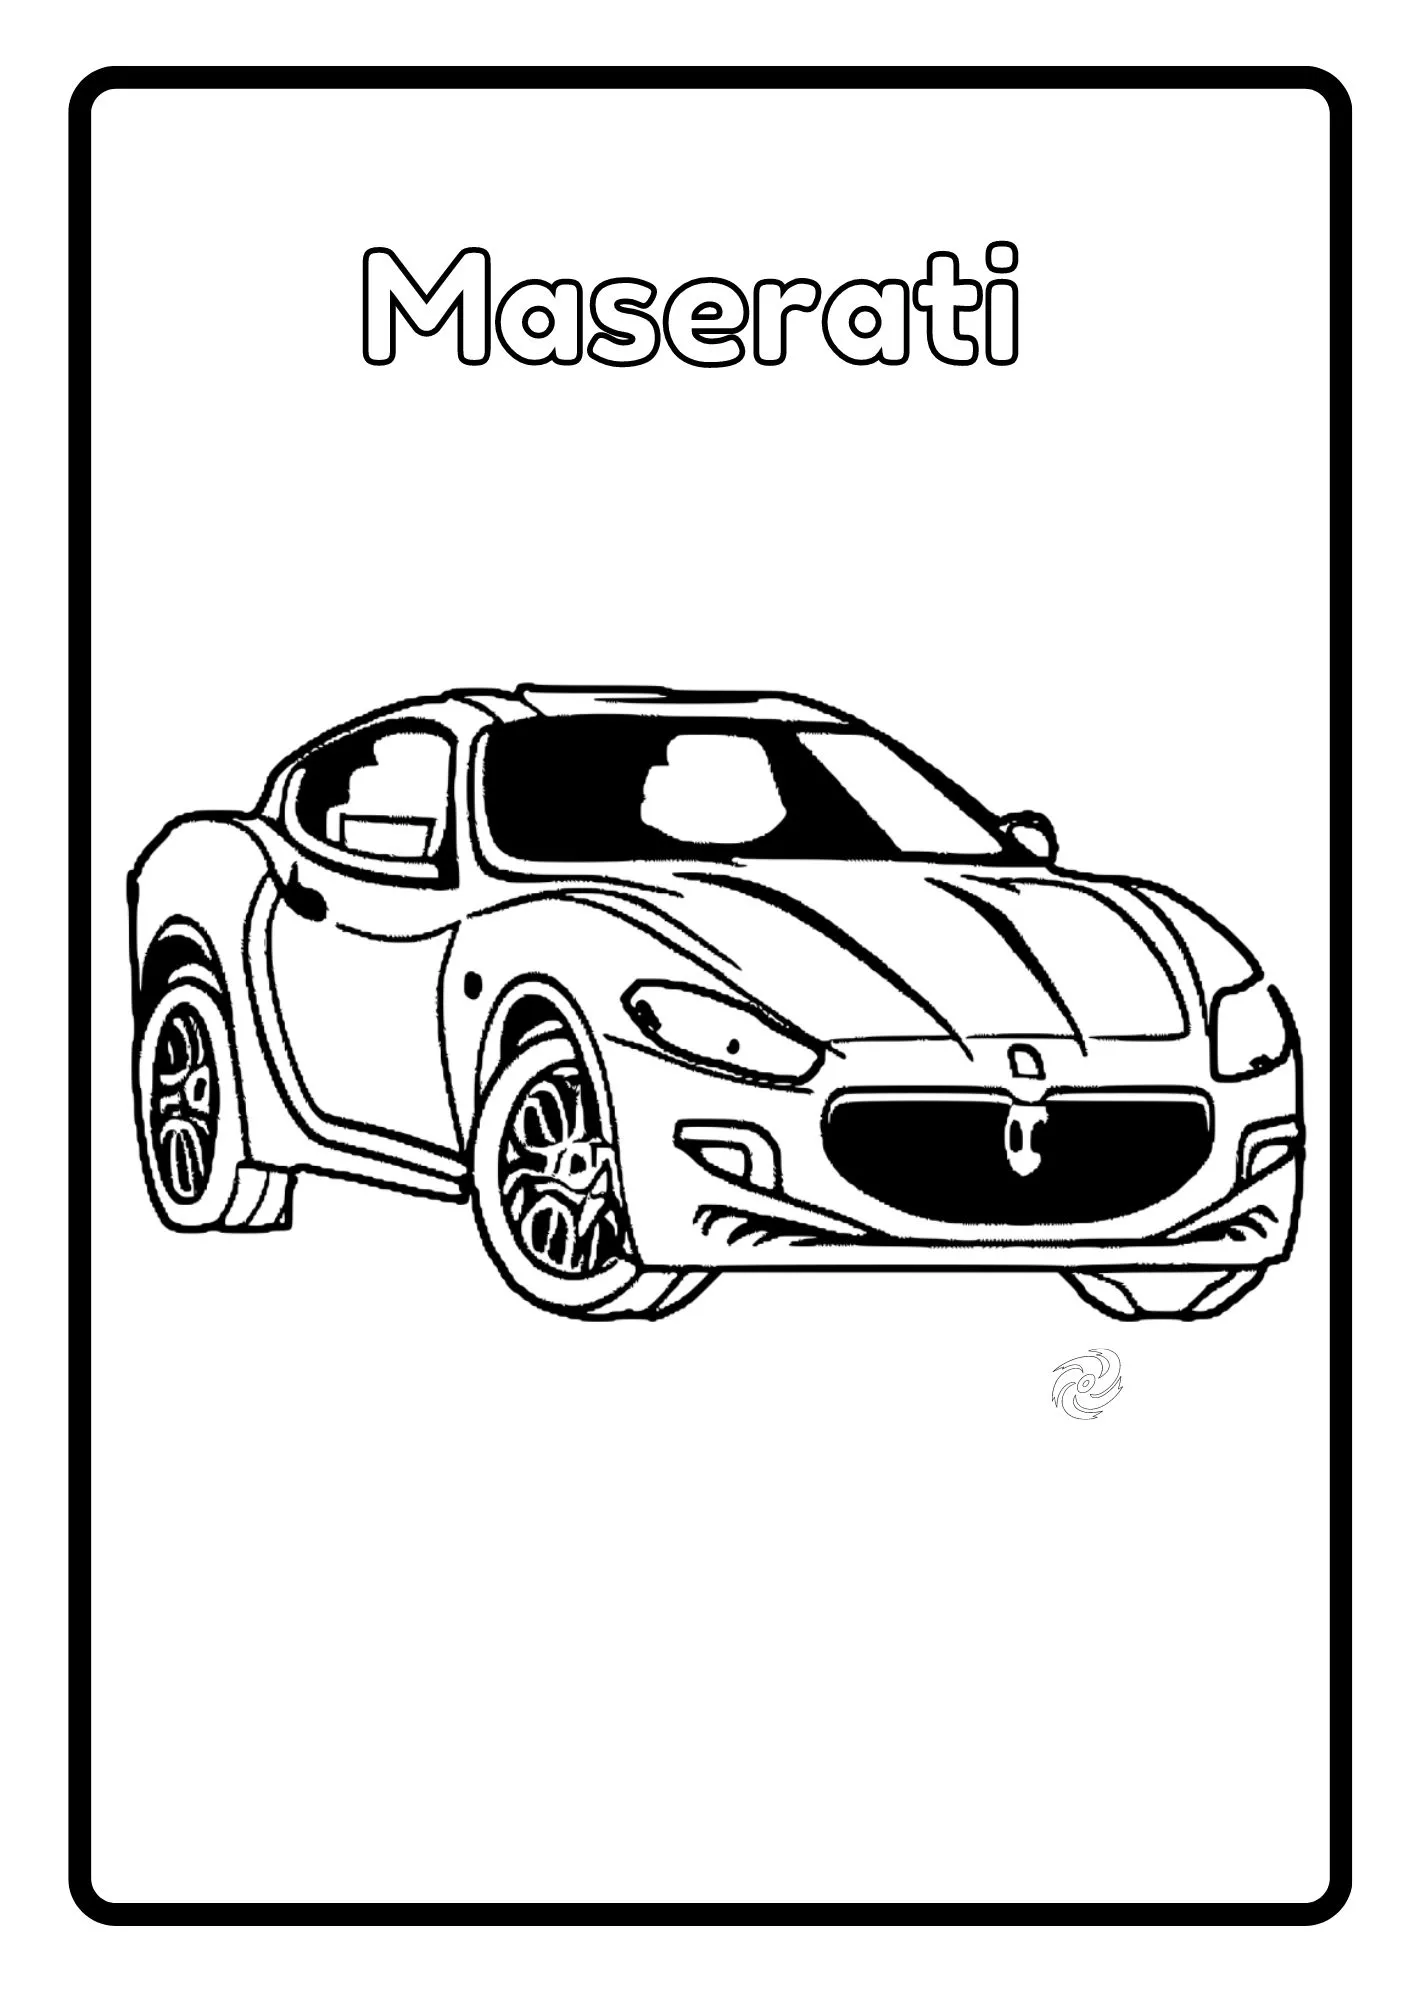 Maserati Coloring Page for Etsy